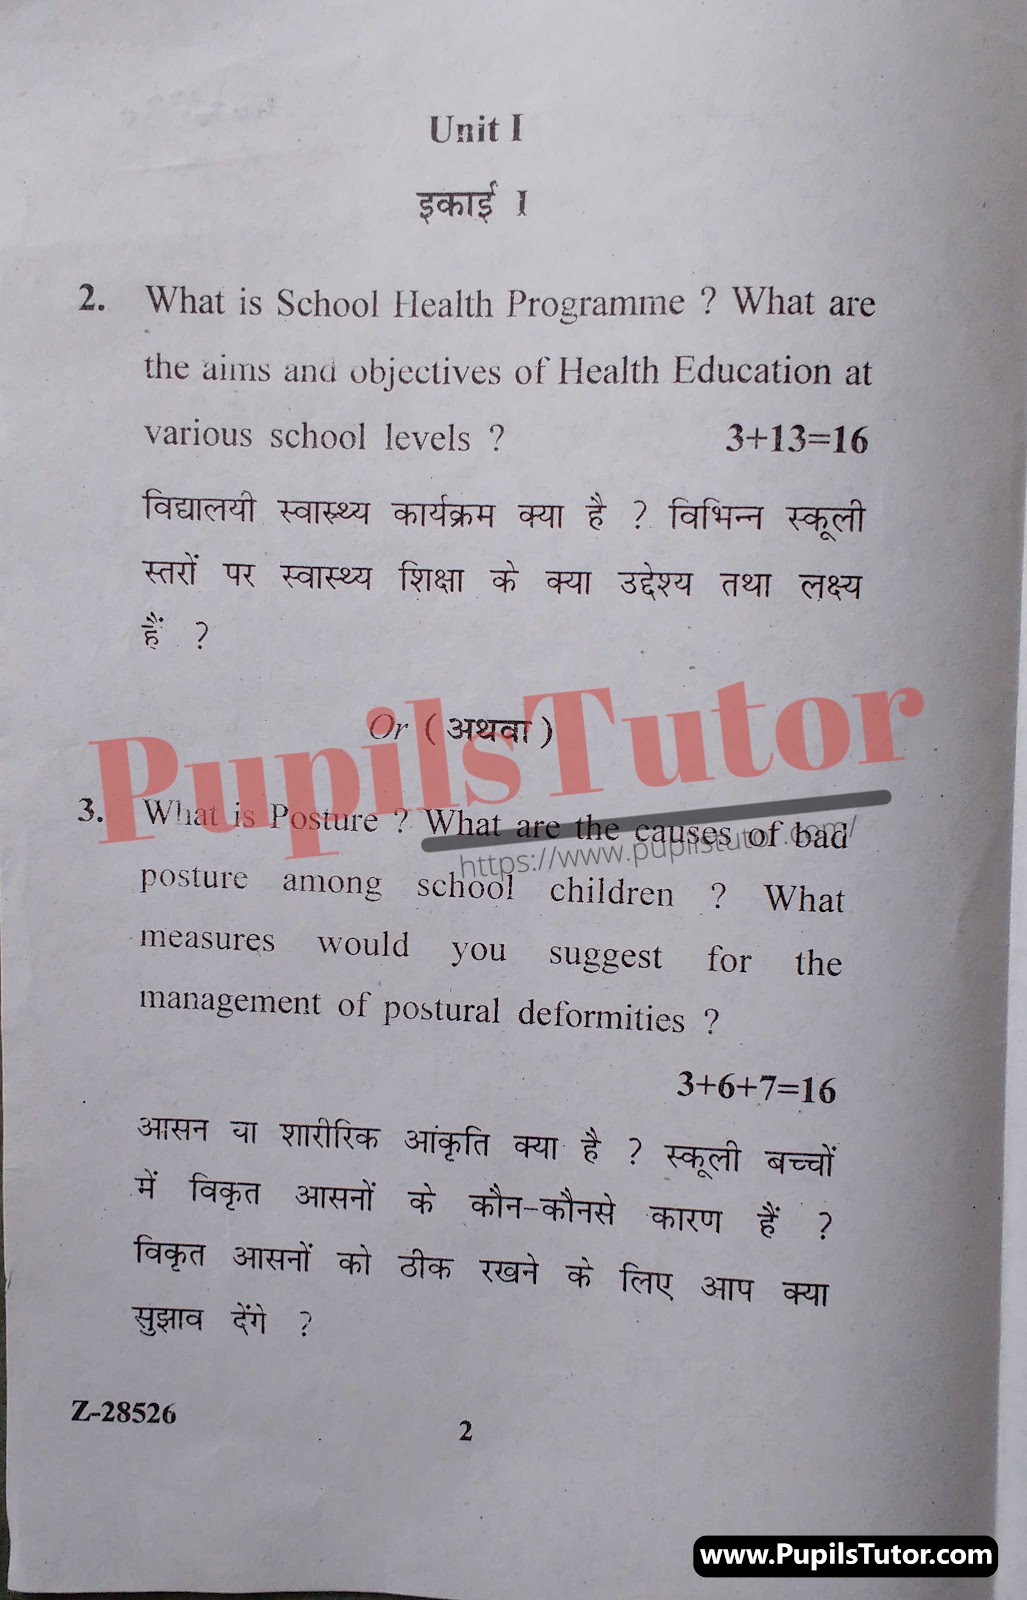 Chaudhary Ranbir Singh University (CRSU), Jind, Haryana B.Ed Health And Physical Education Second Year Important Question Answer And Solution - www.pupilstutor.com (Paper Page Number 2)